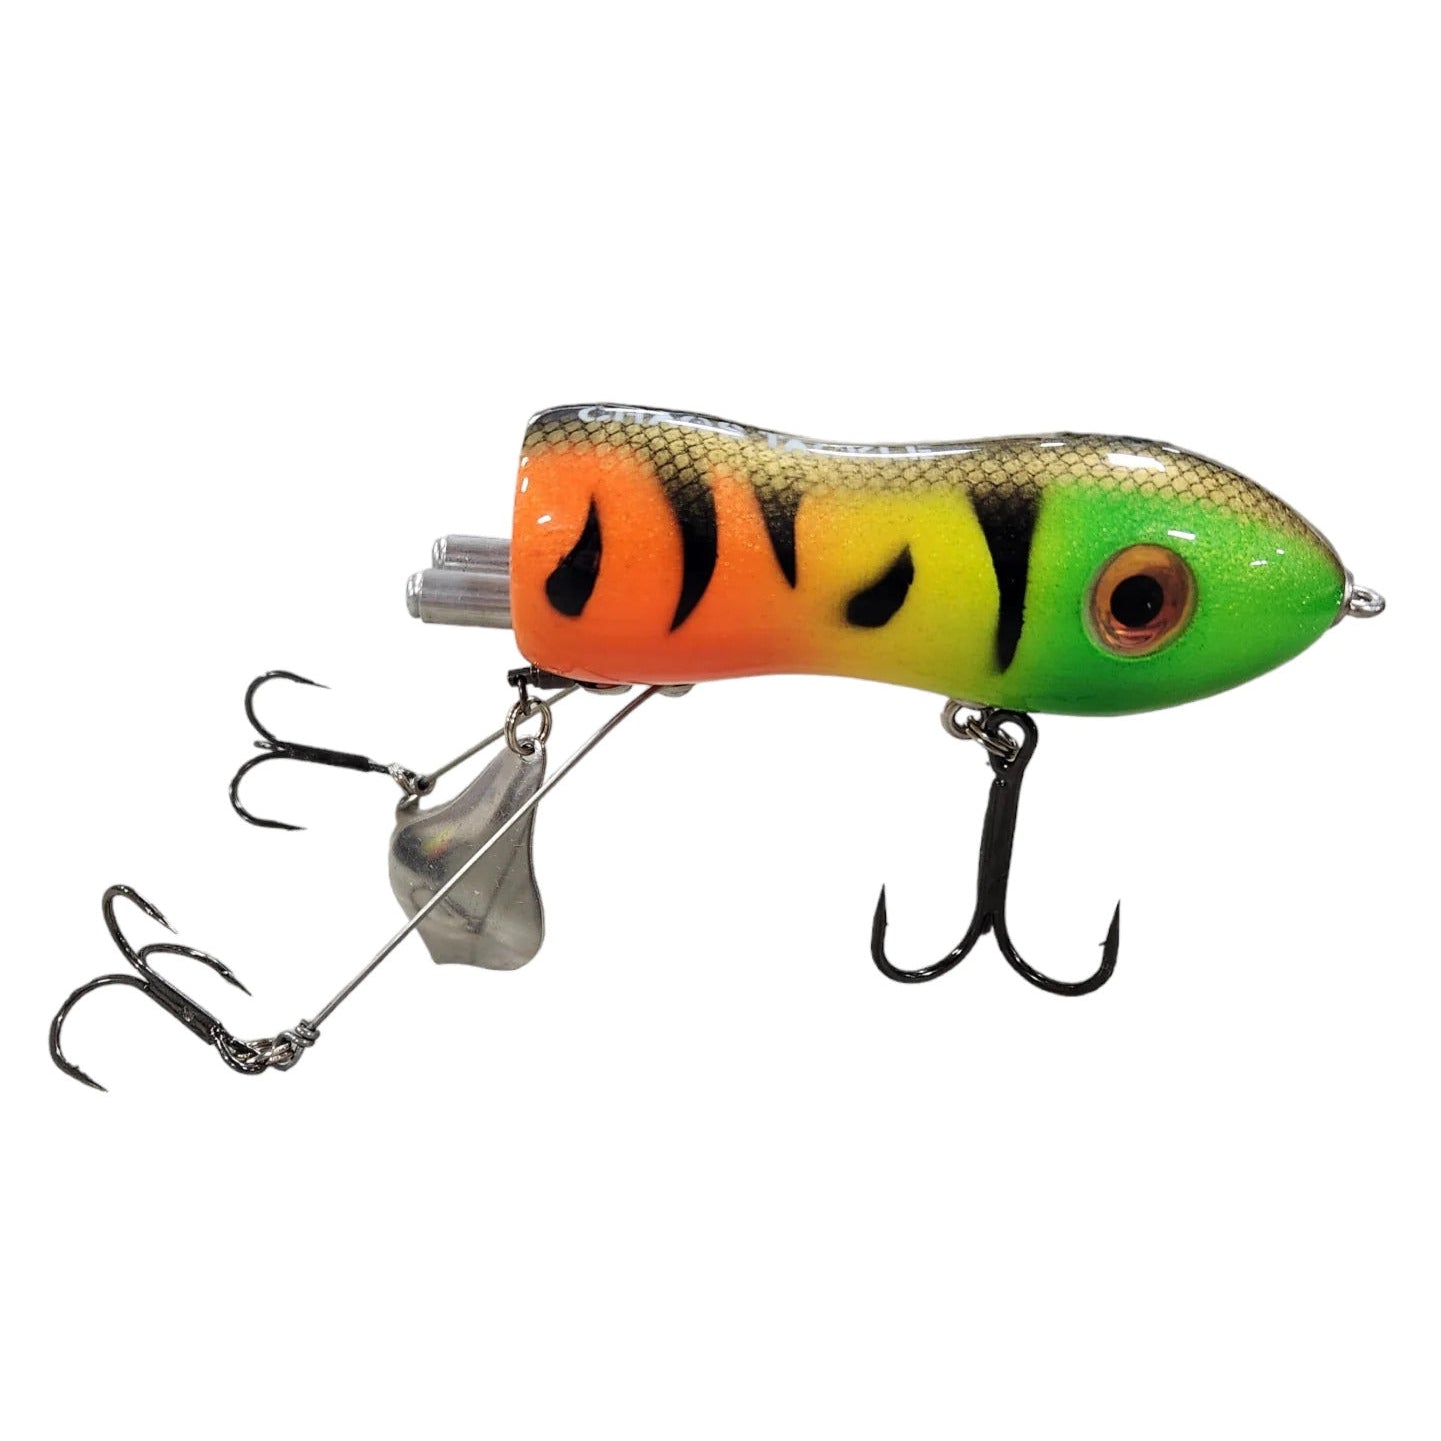 View of Topwater Chaos Tackle Psycho Flaptail Fire Tiger available at EZOKO Pike and Musky Shop